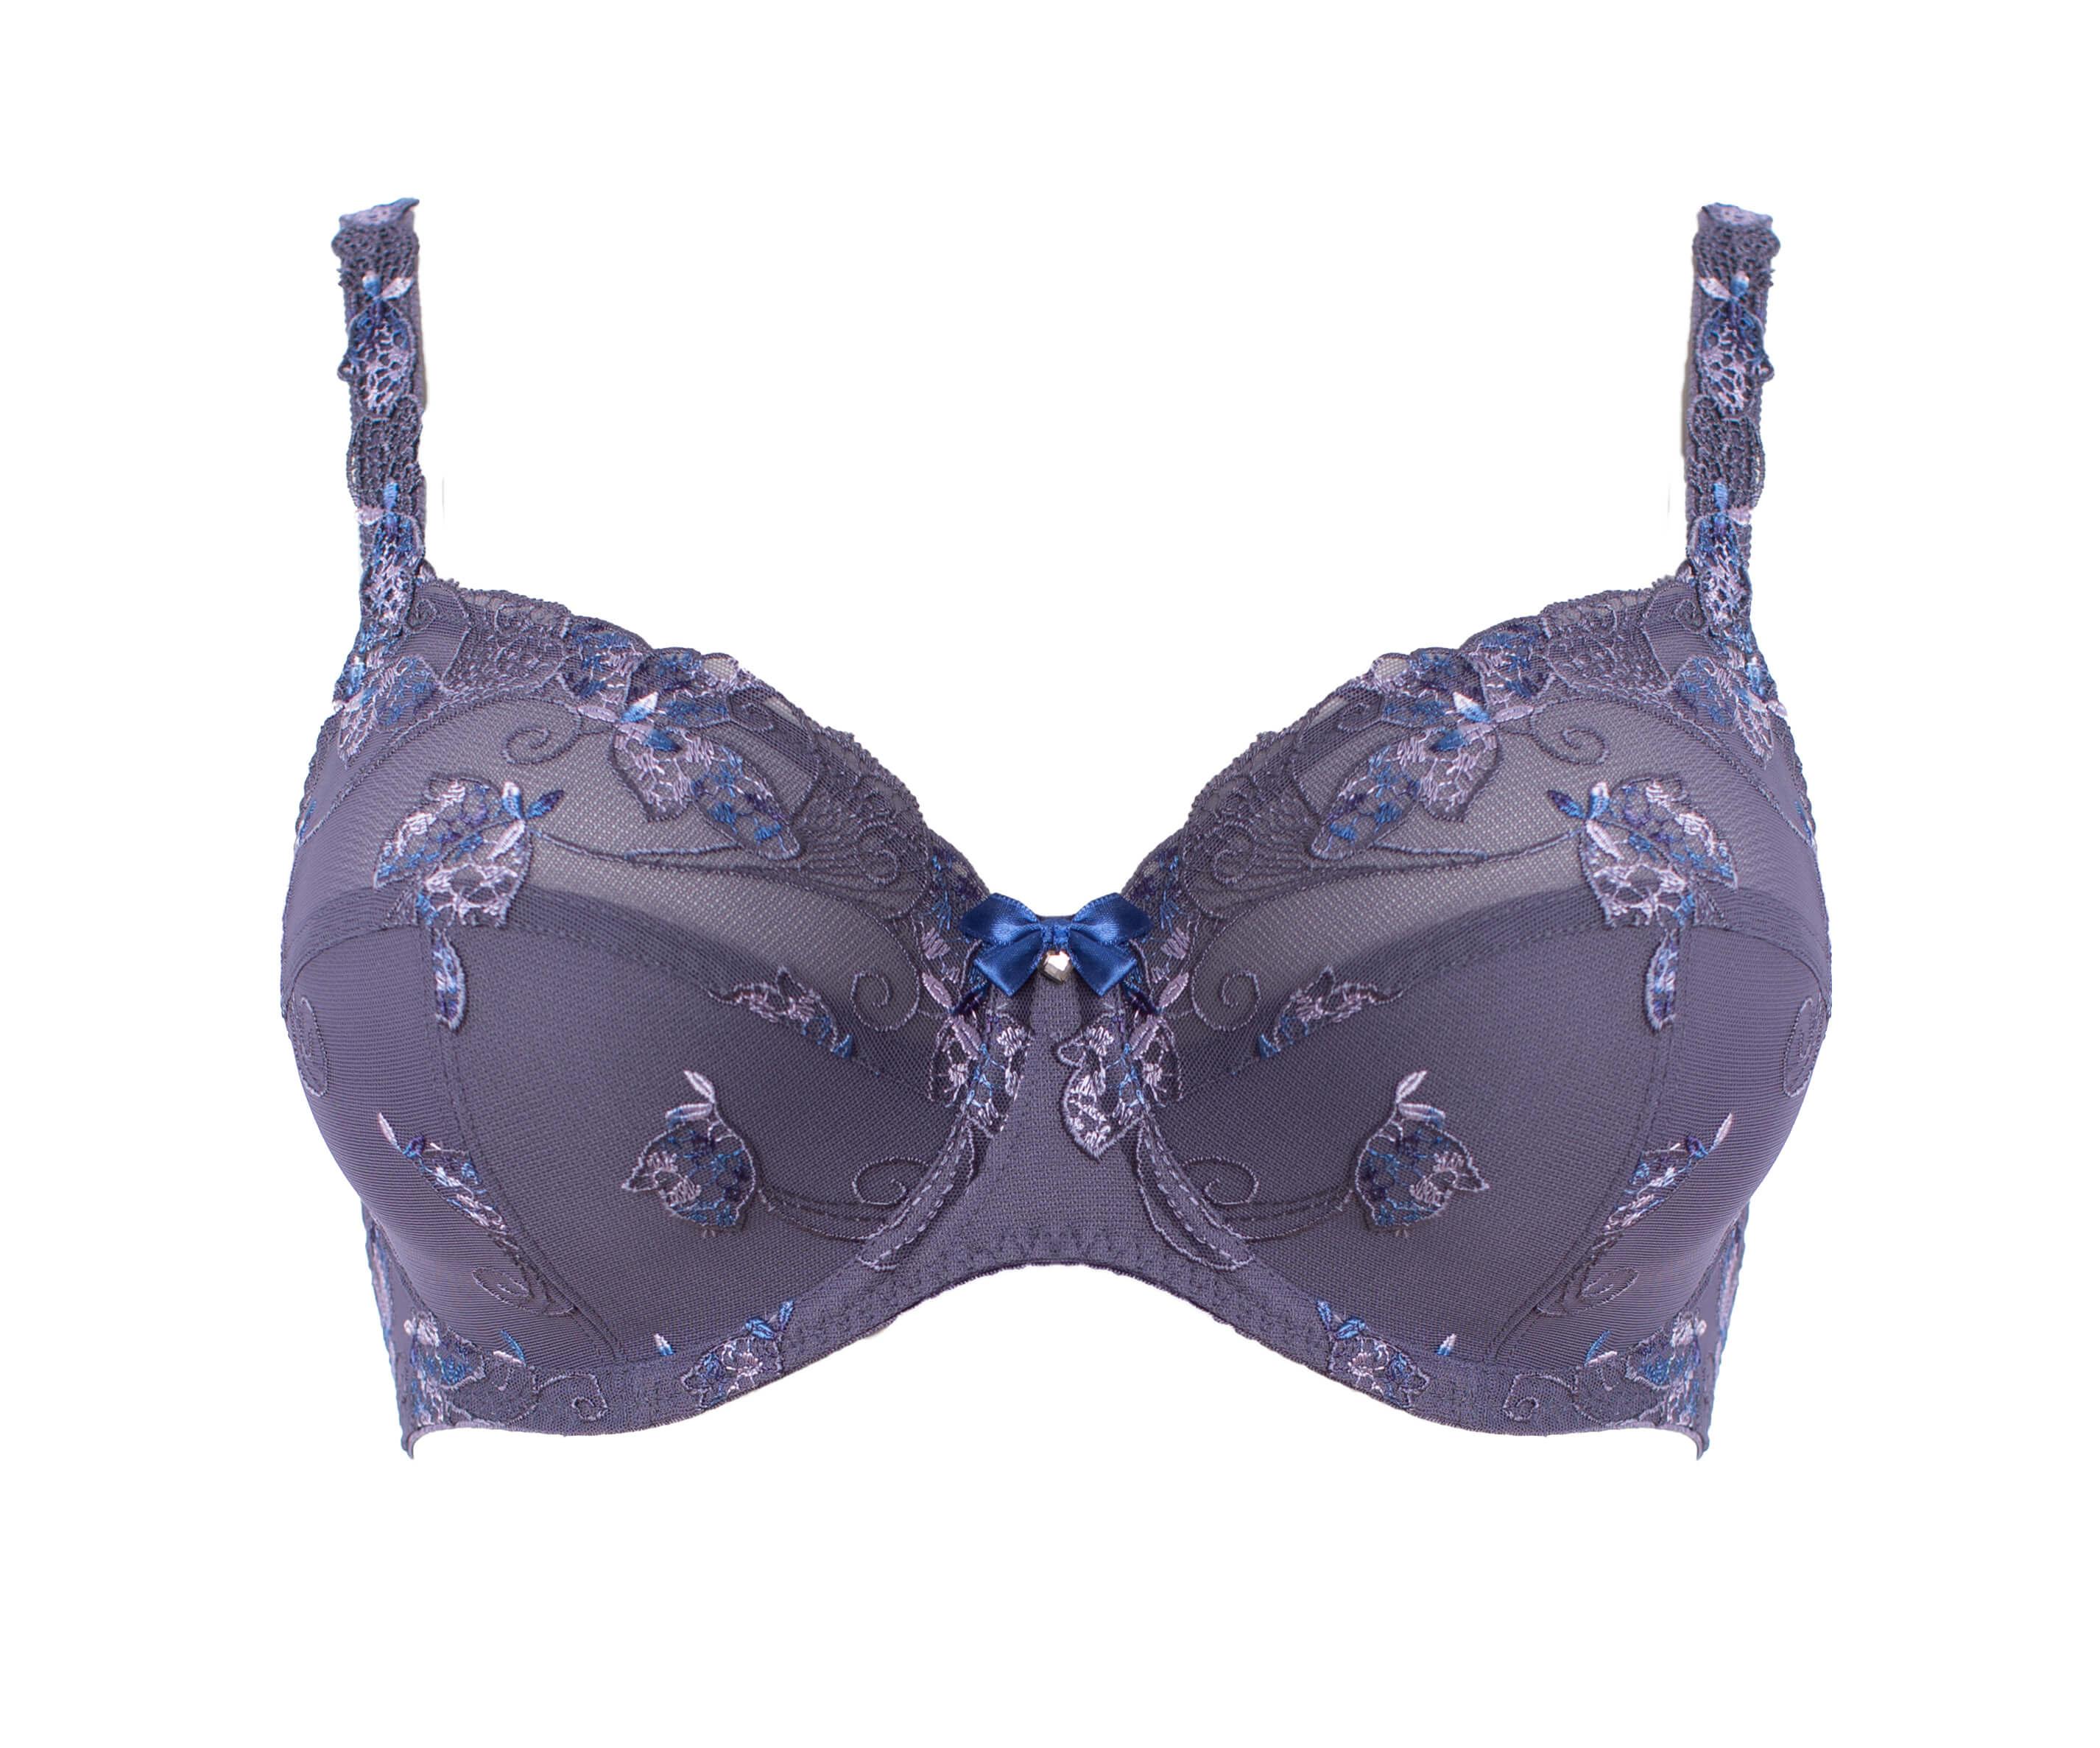 Stone Carla Underwired Large Cup Bra